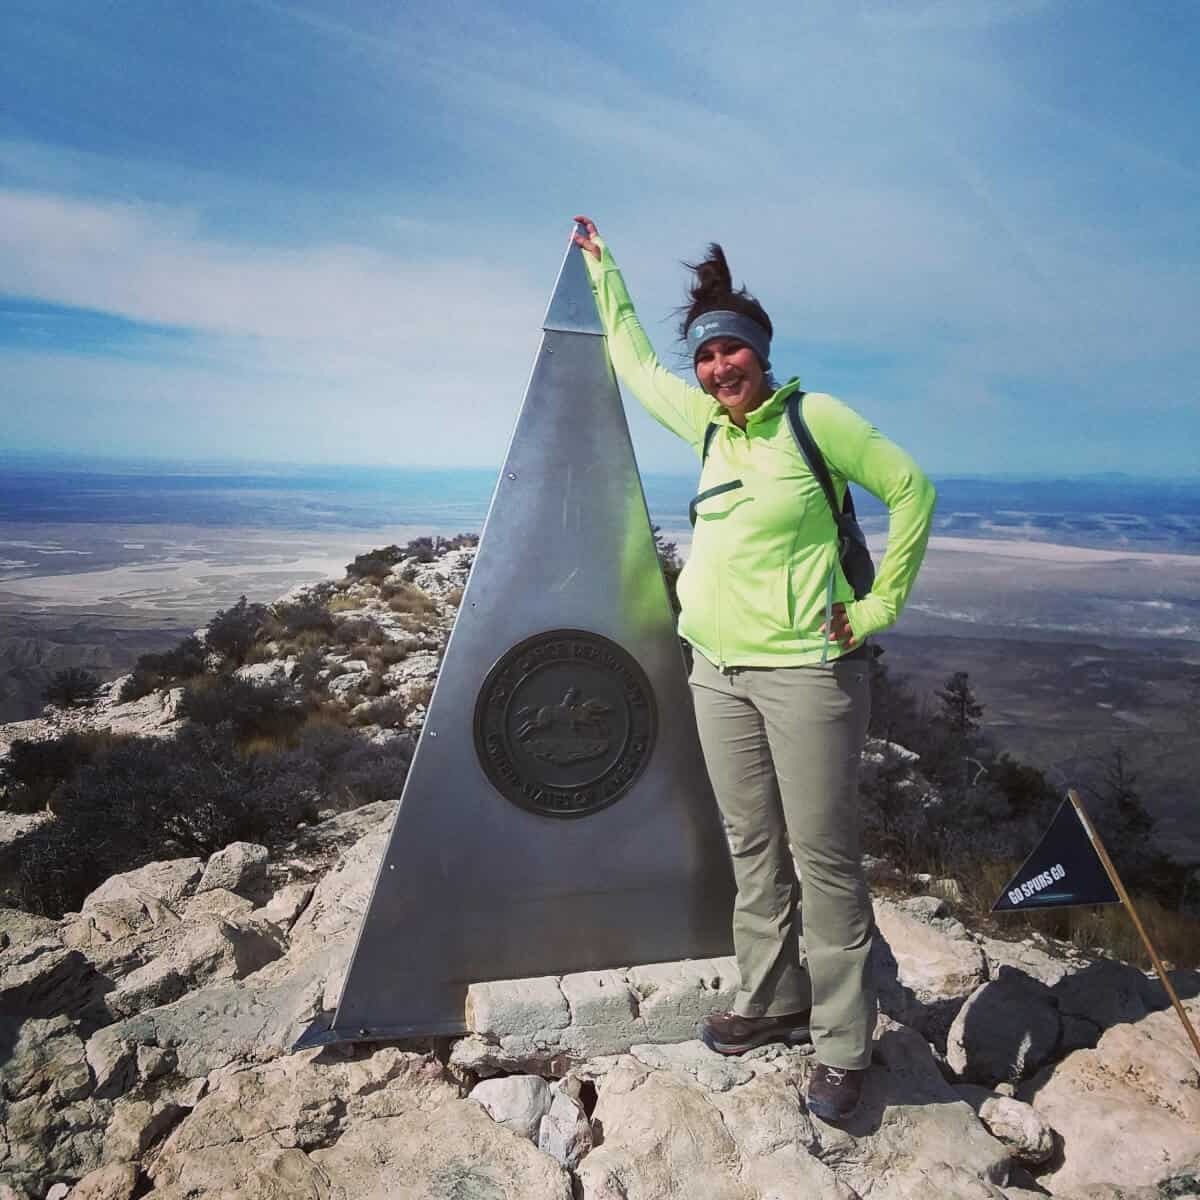 The summit of the Guadalupe Peak hike